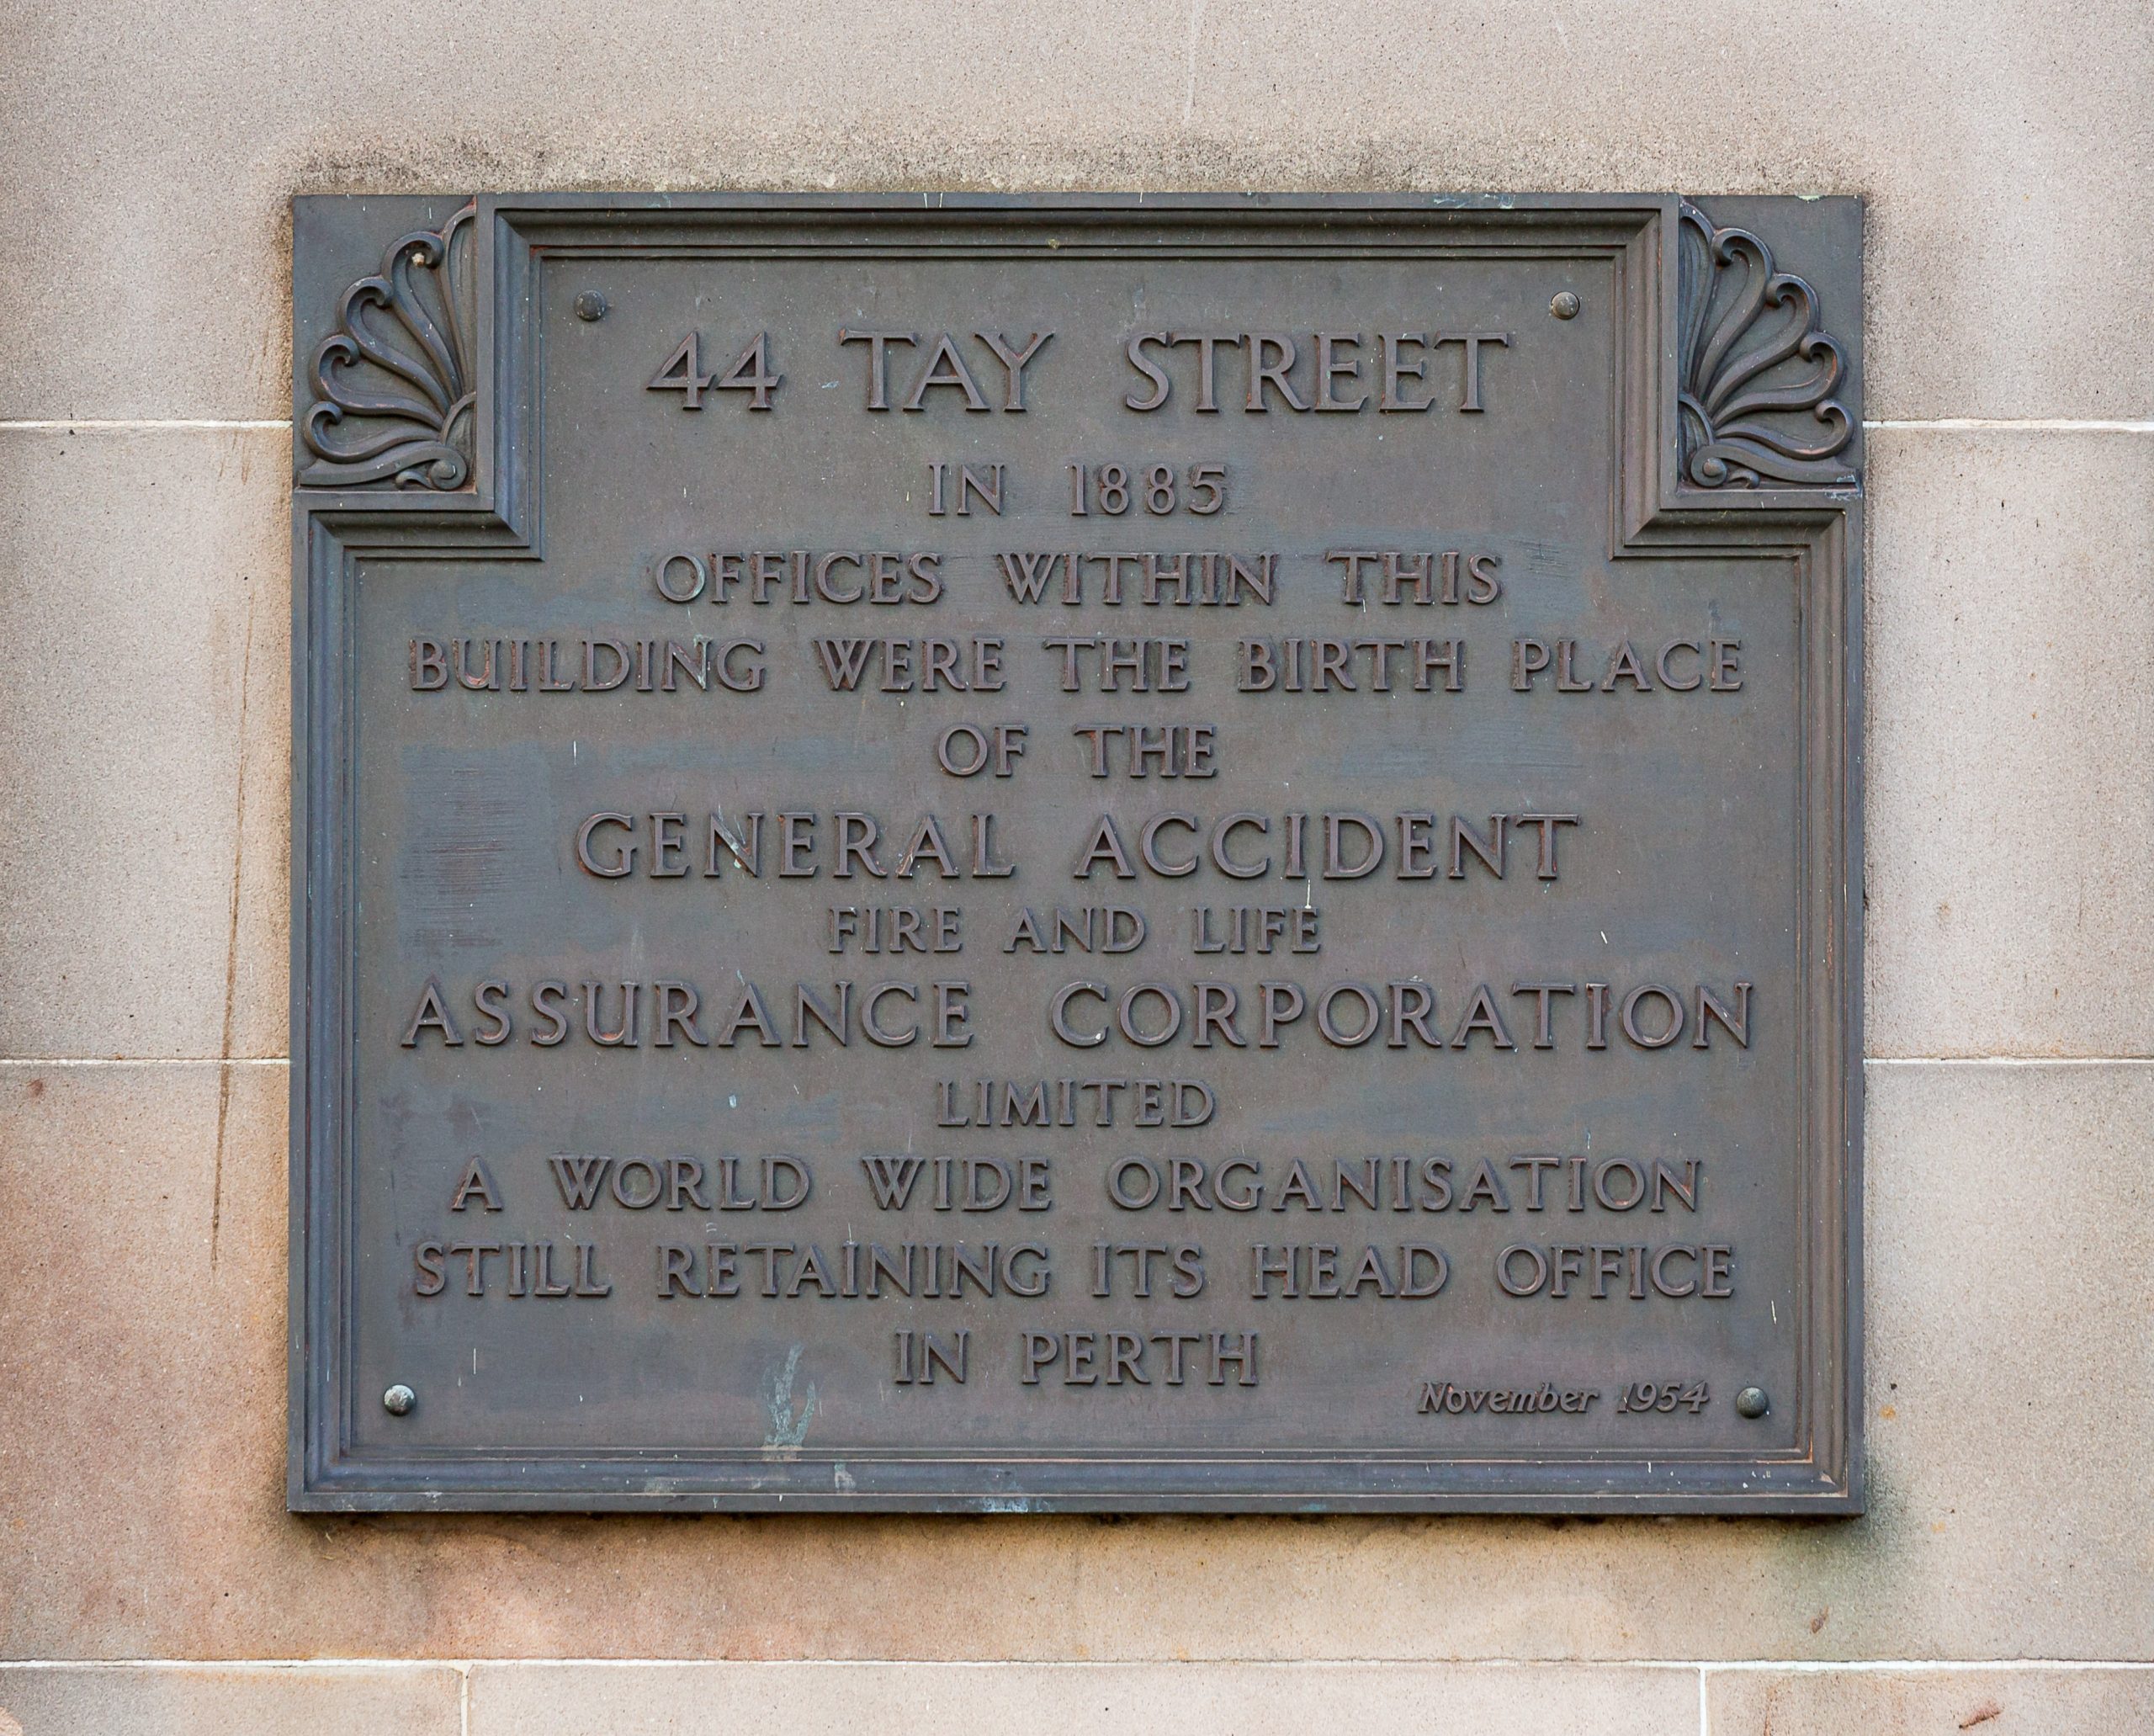 Birthplace of General Accident in Tay Street